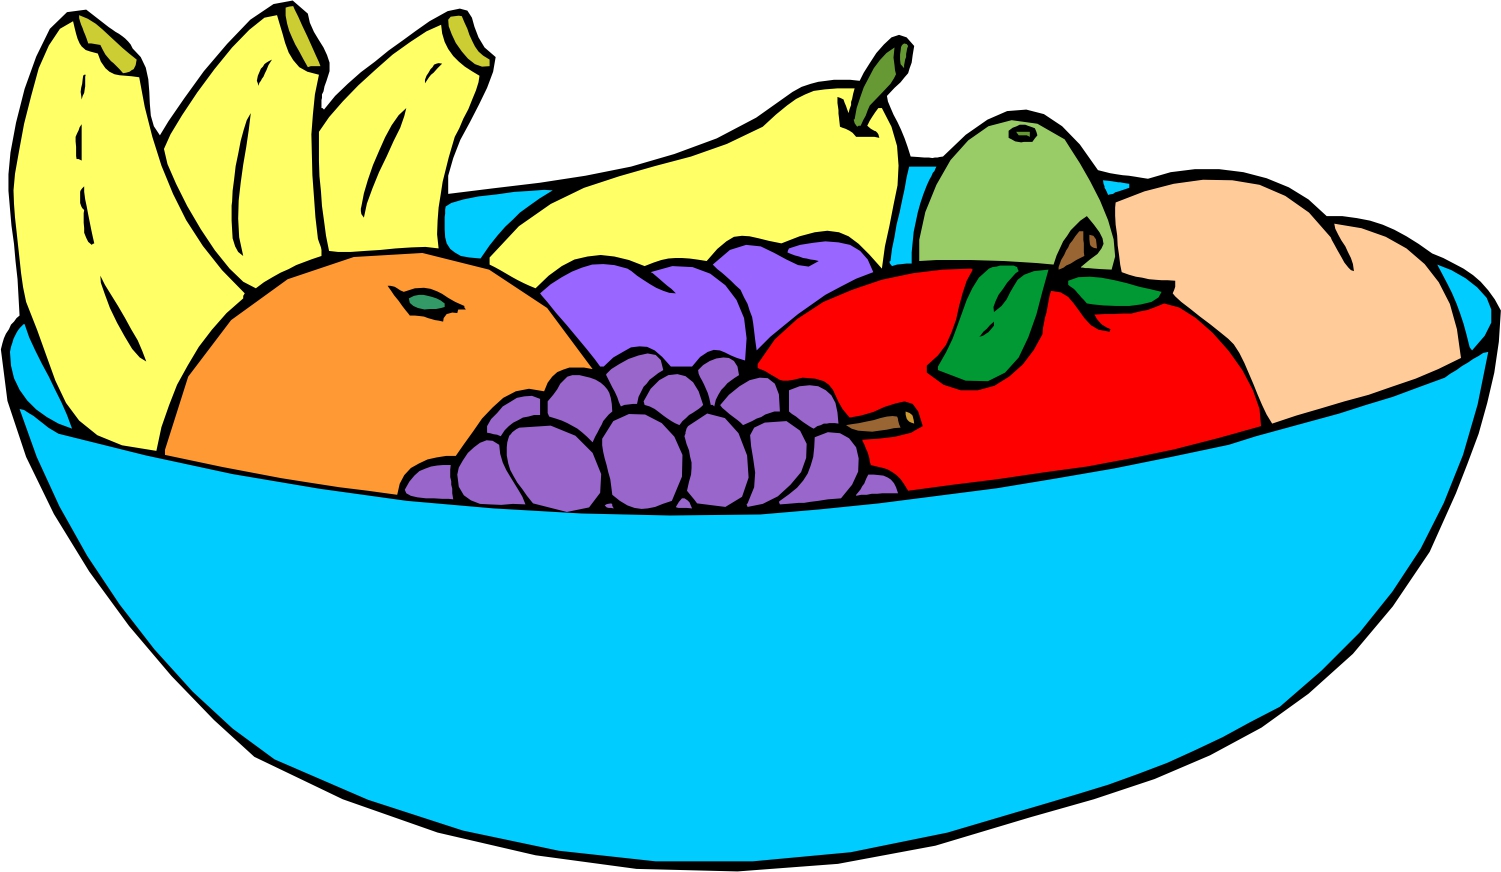 Bowl Of Fruits Clipart